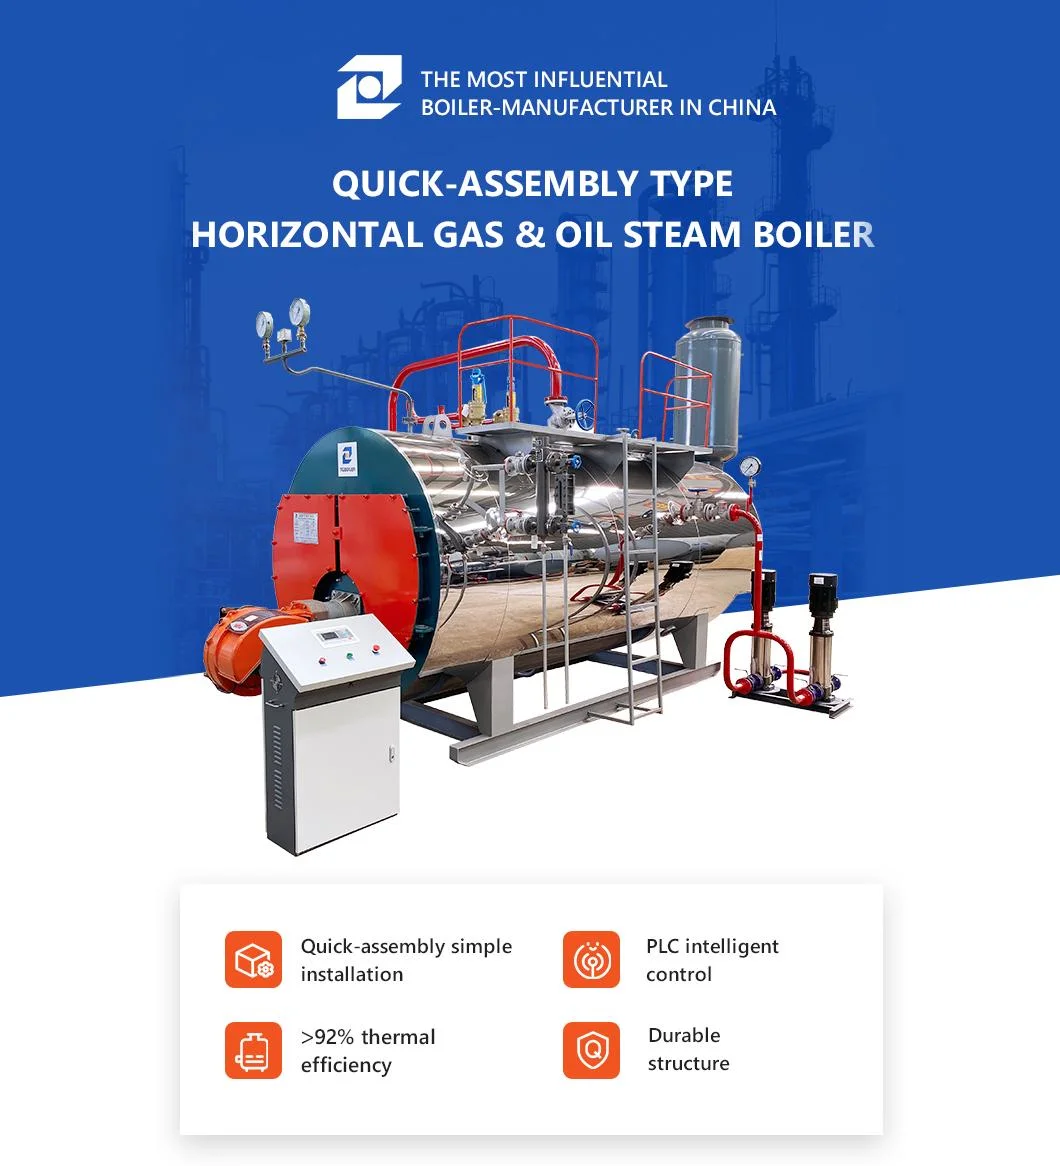 Coke Oven Exhaust Gas Waste Heat Recovery Boiler